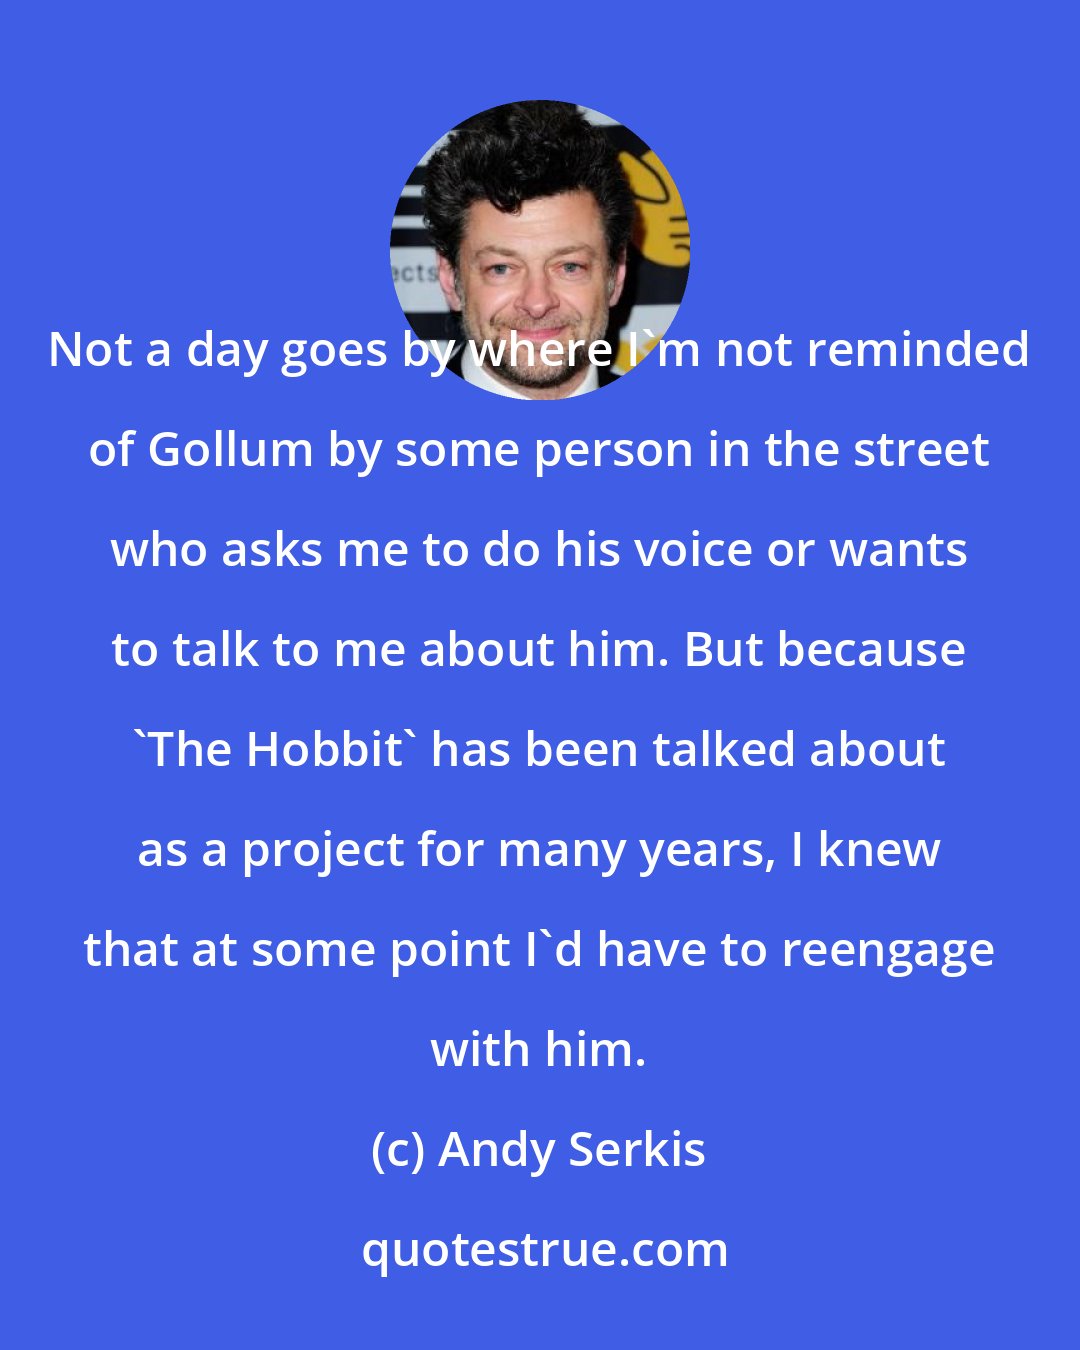 Andy Serkis: Not a day goes by where I'm not reminded of Gollum by some person in the street who asks me to do his voice or wants to talk to me about him. But because 'The Hobbit' has been talked about as a project for many years, I knew that at some point I'd have to reengage with him.